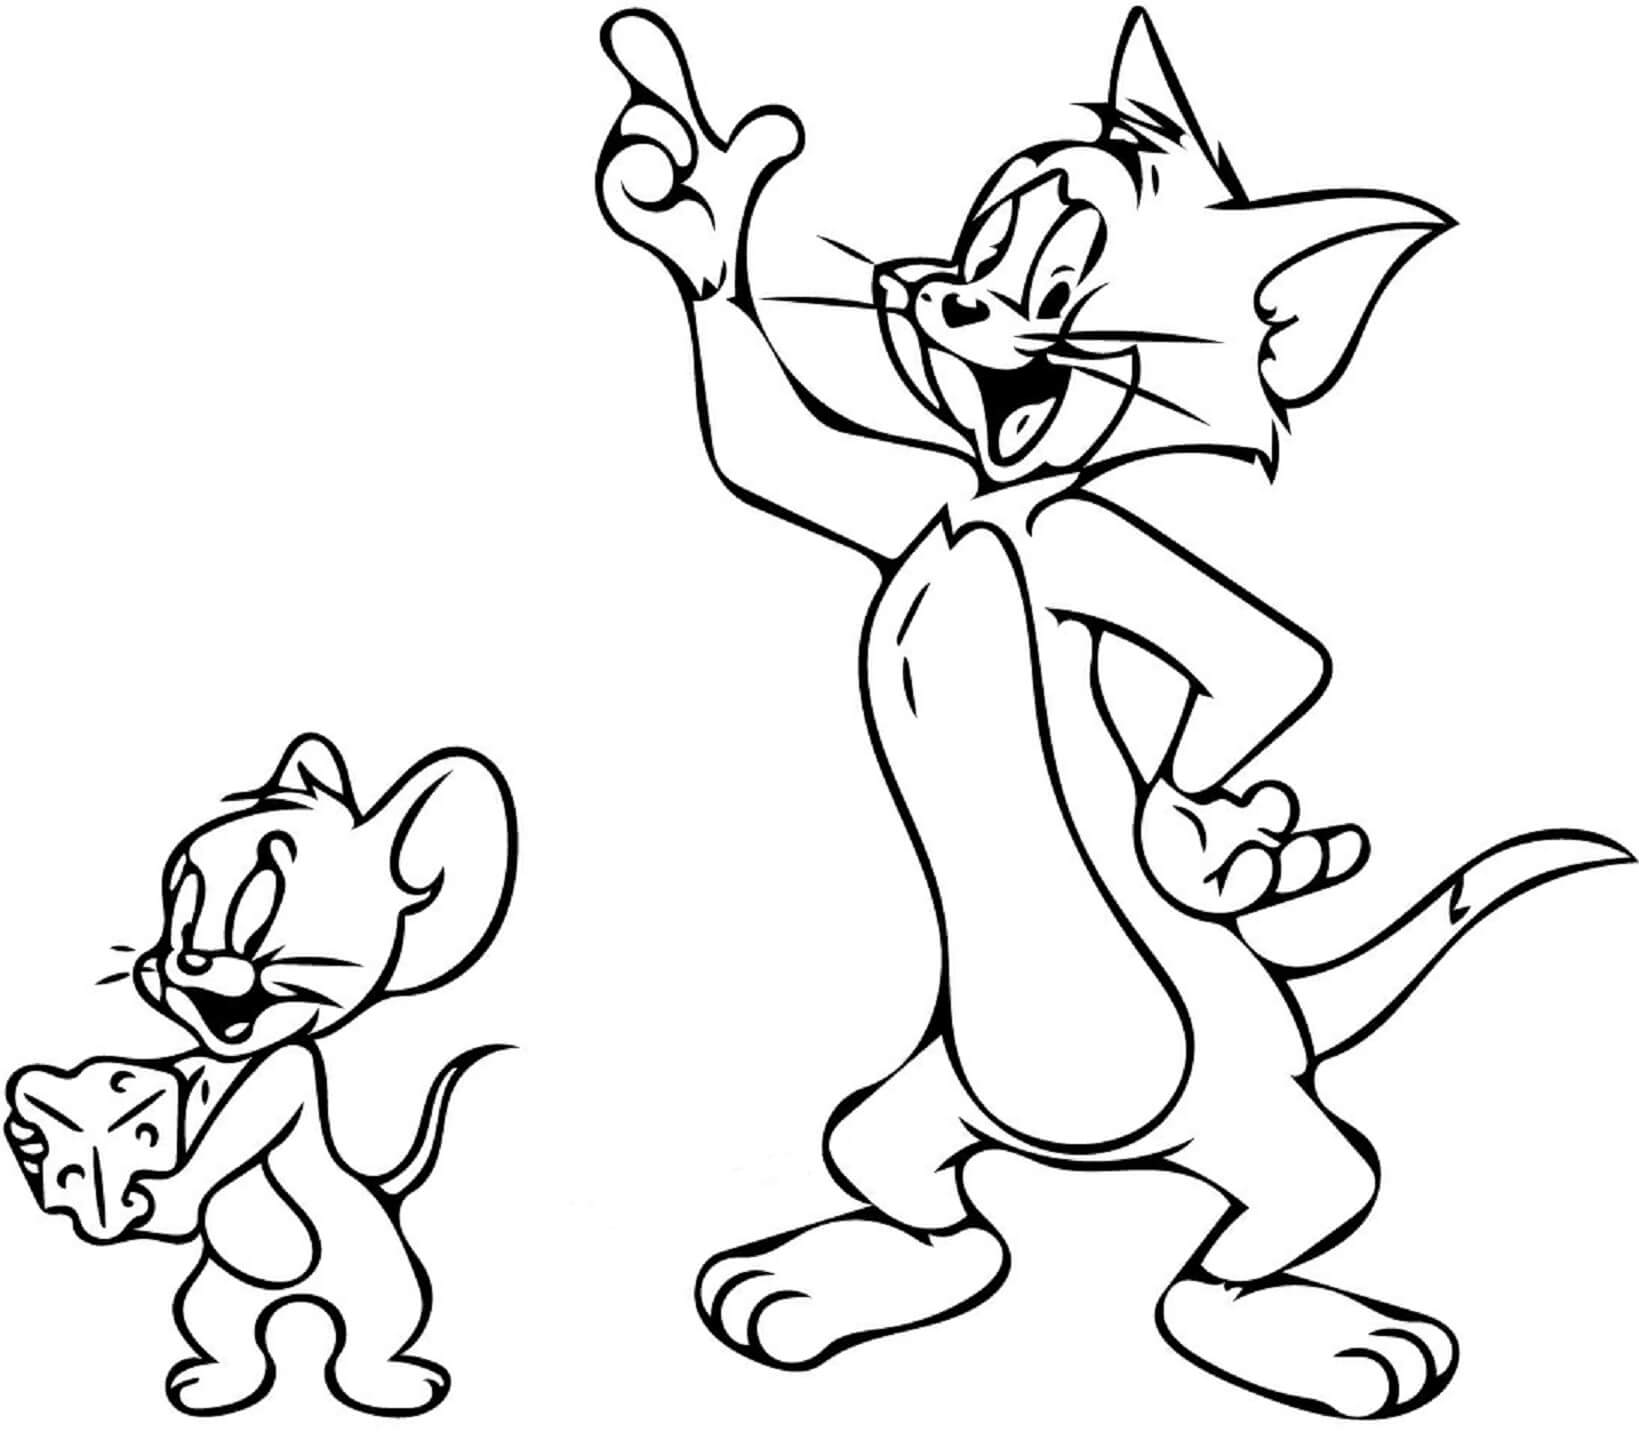 Tom And Jerry Coloring Pages Online Free | Cartoon coloring pages, Cartoon  drawings, Tom and jerry drawing